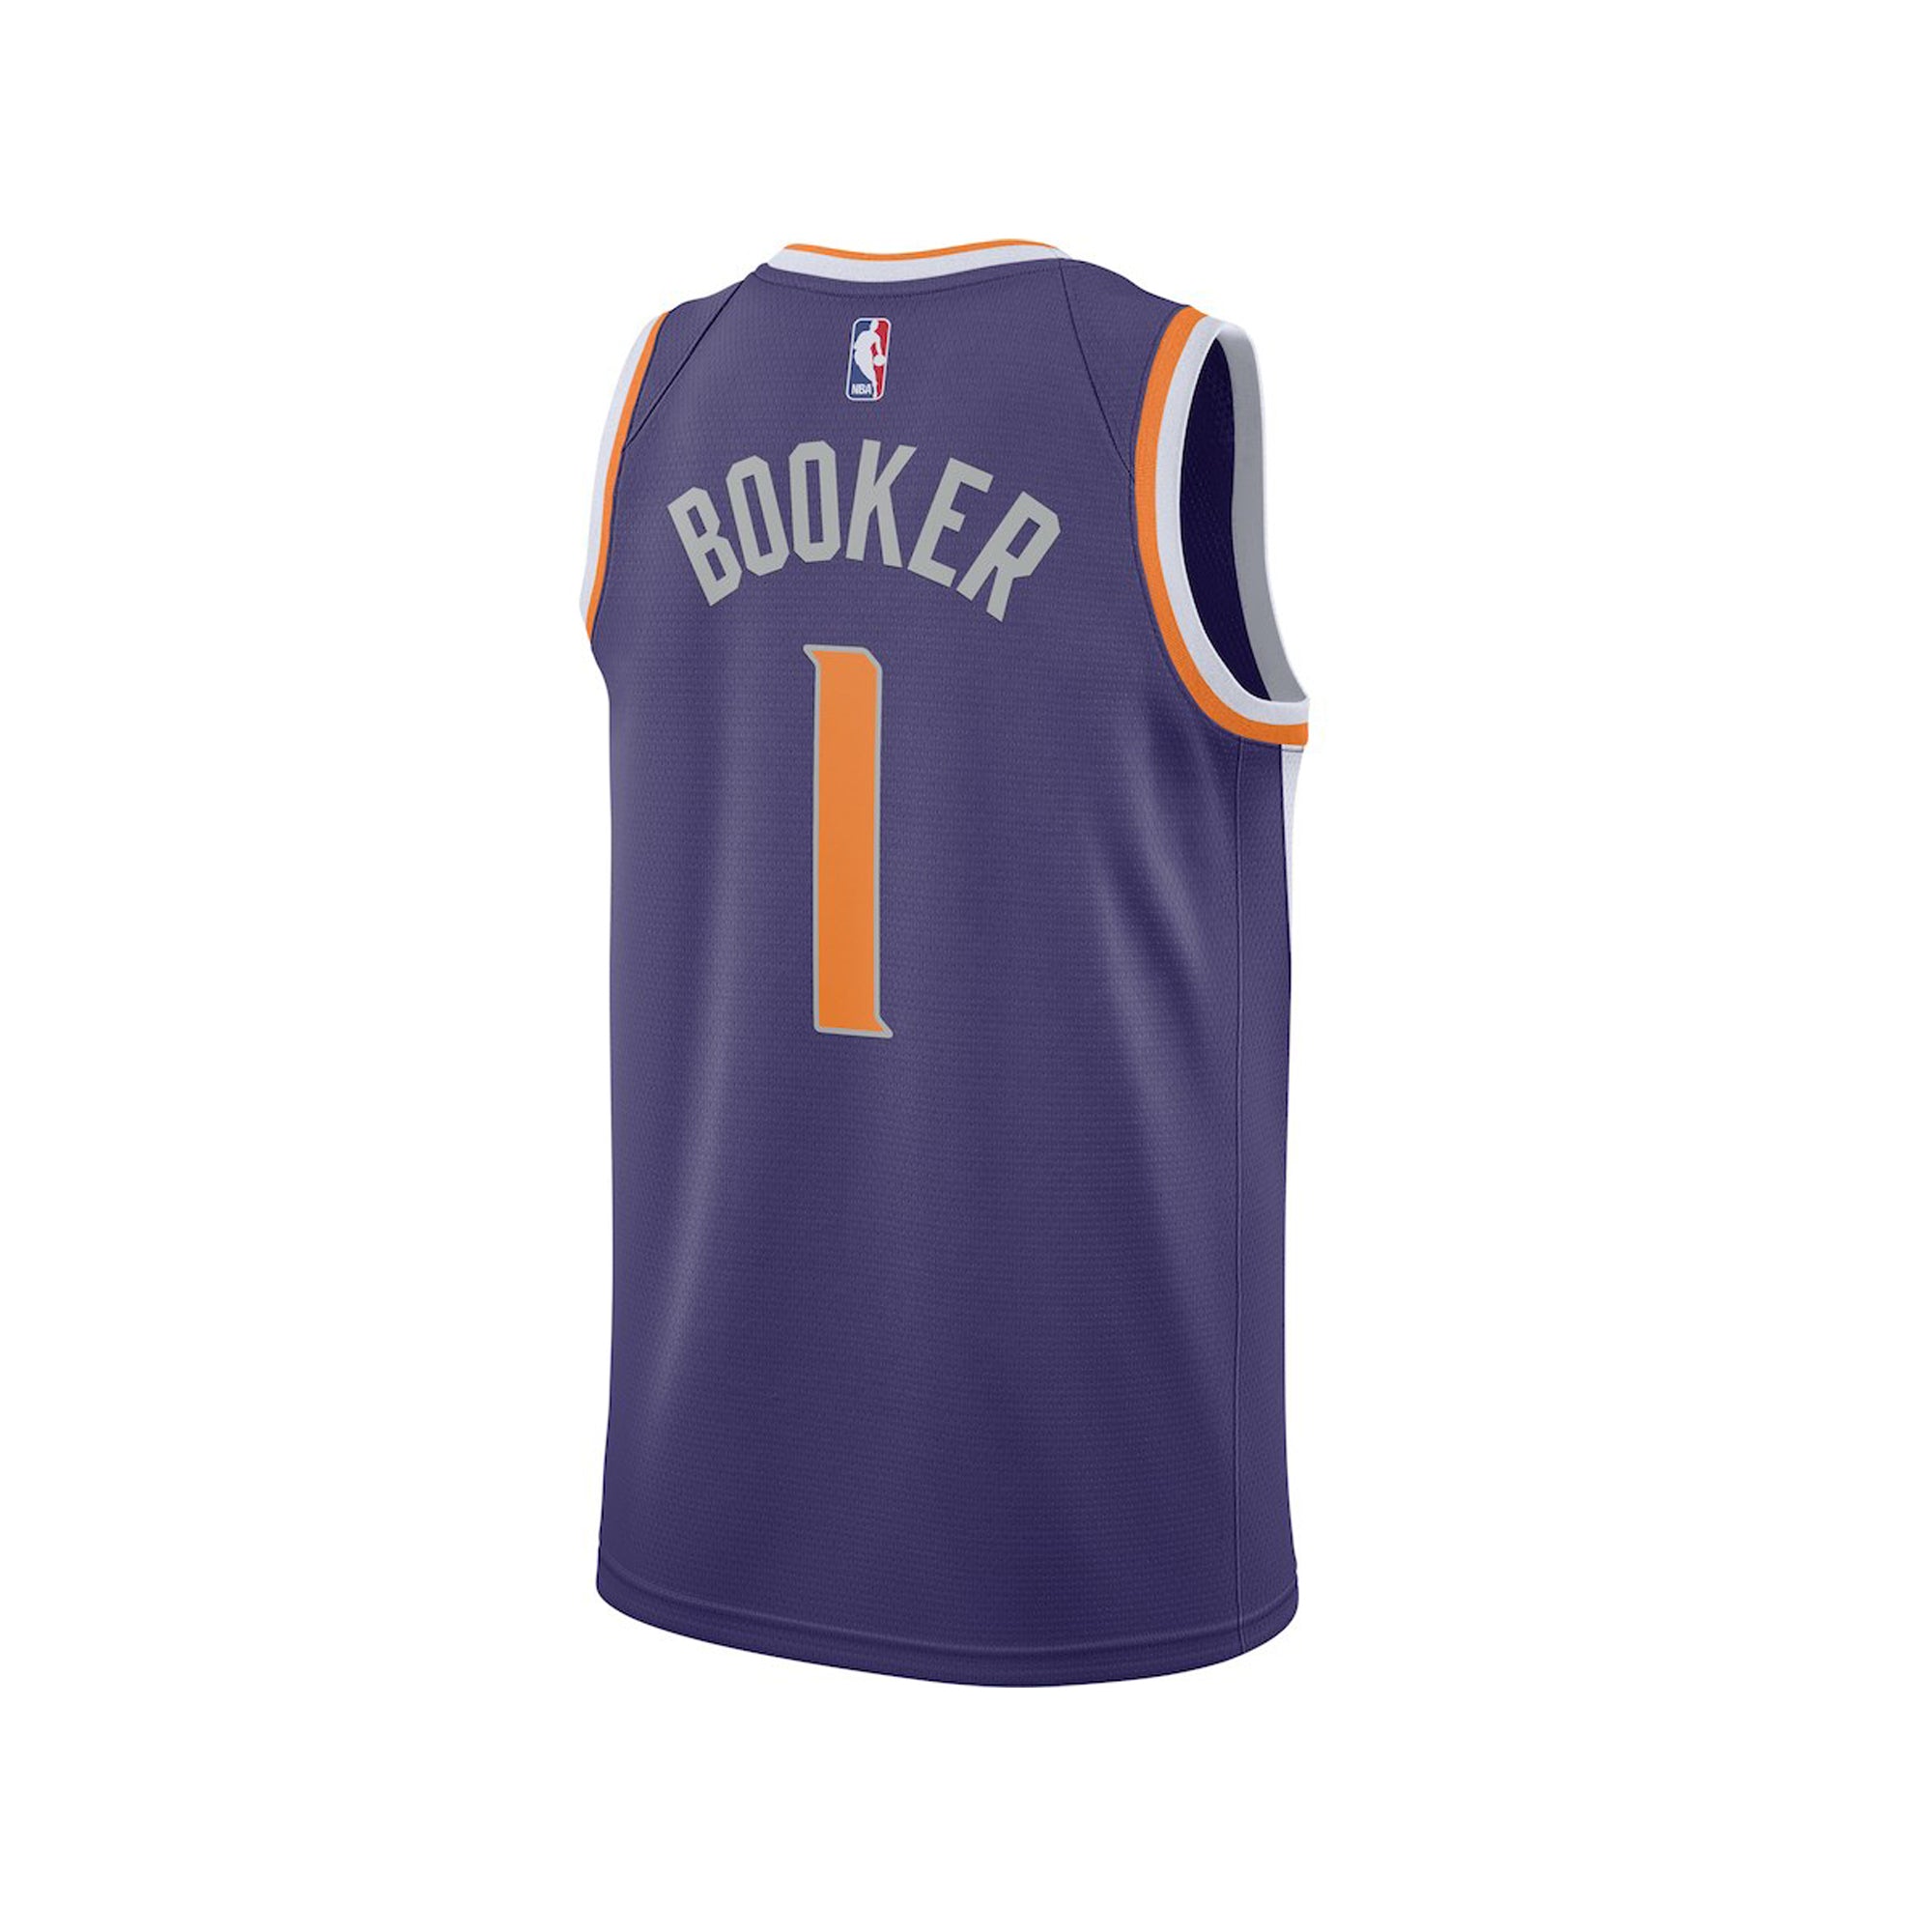 devin booker jersey youth